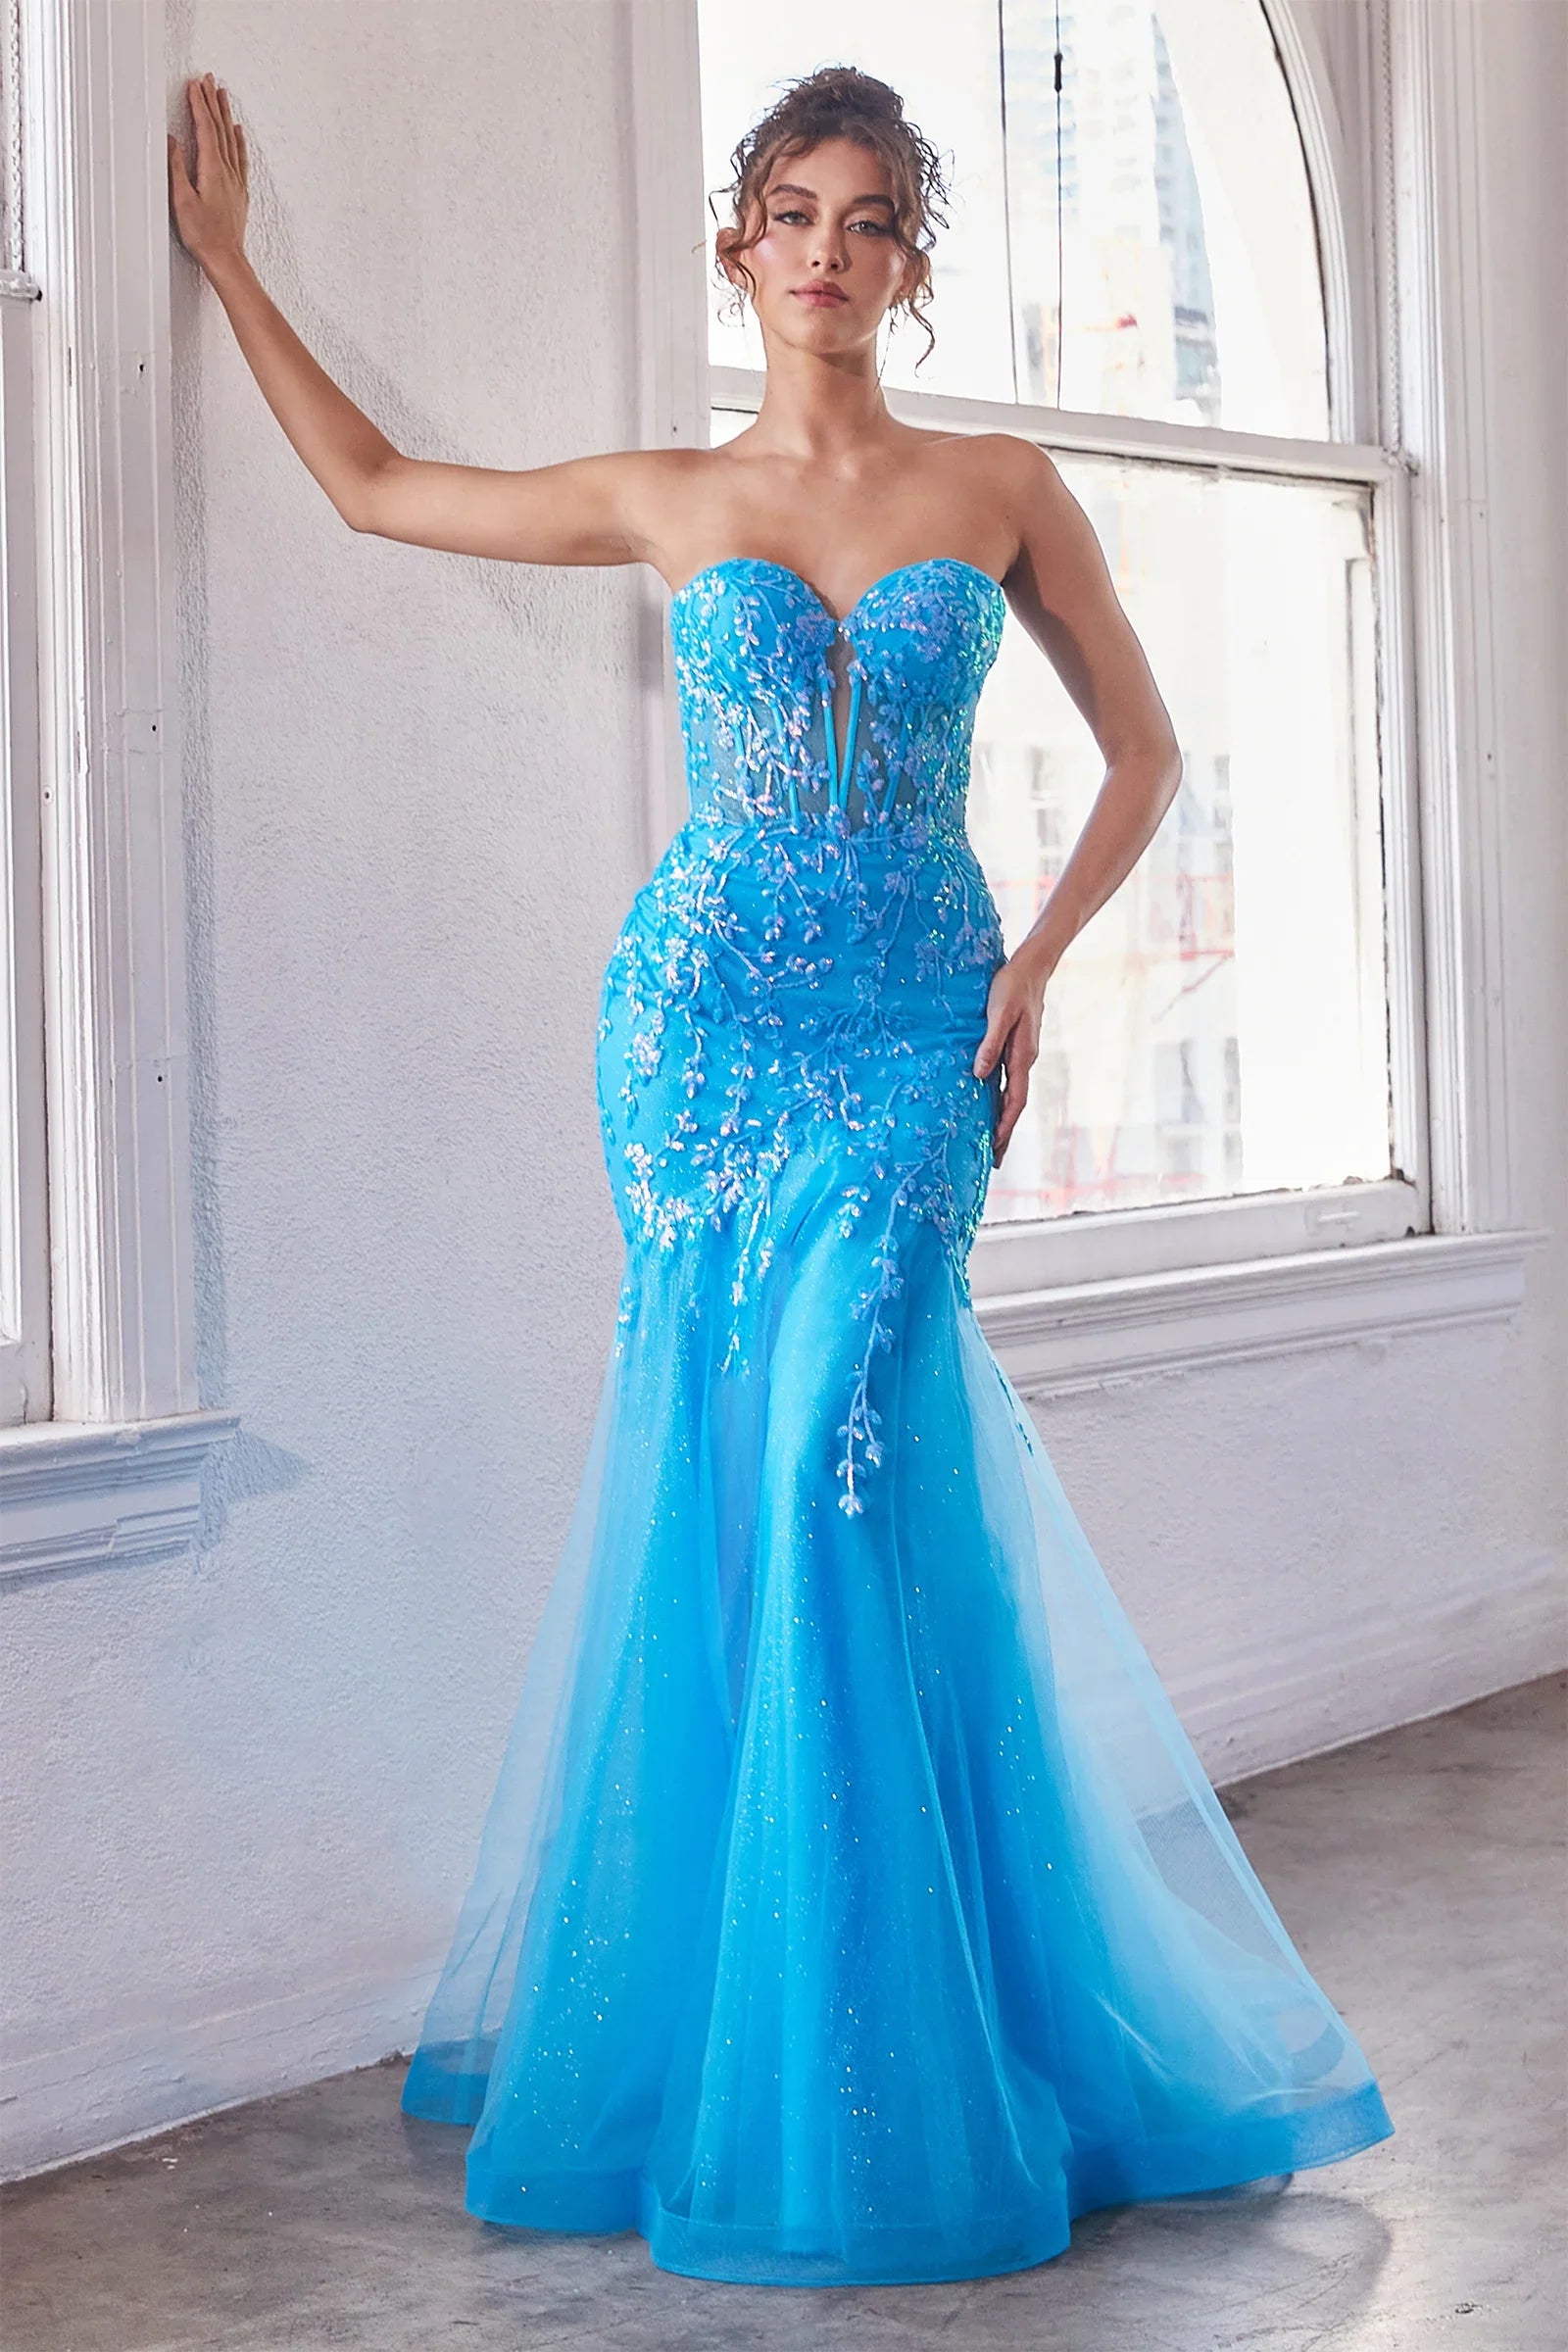 10 Stunning Strapless Corset Prom Dresses For The Perfect Night Out